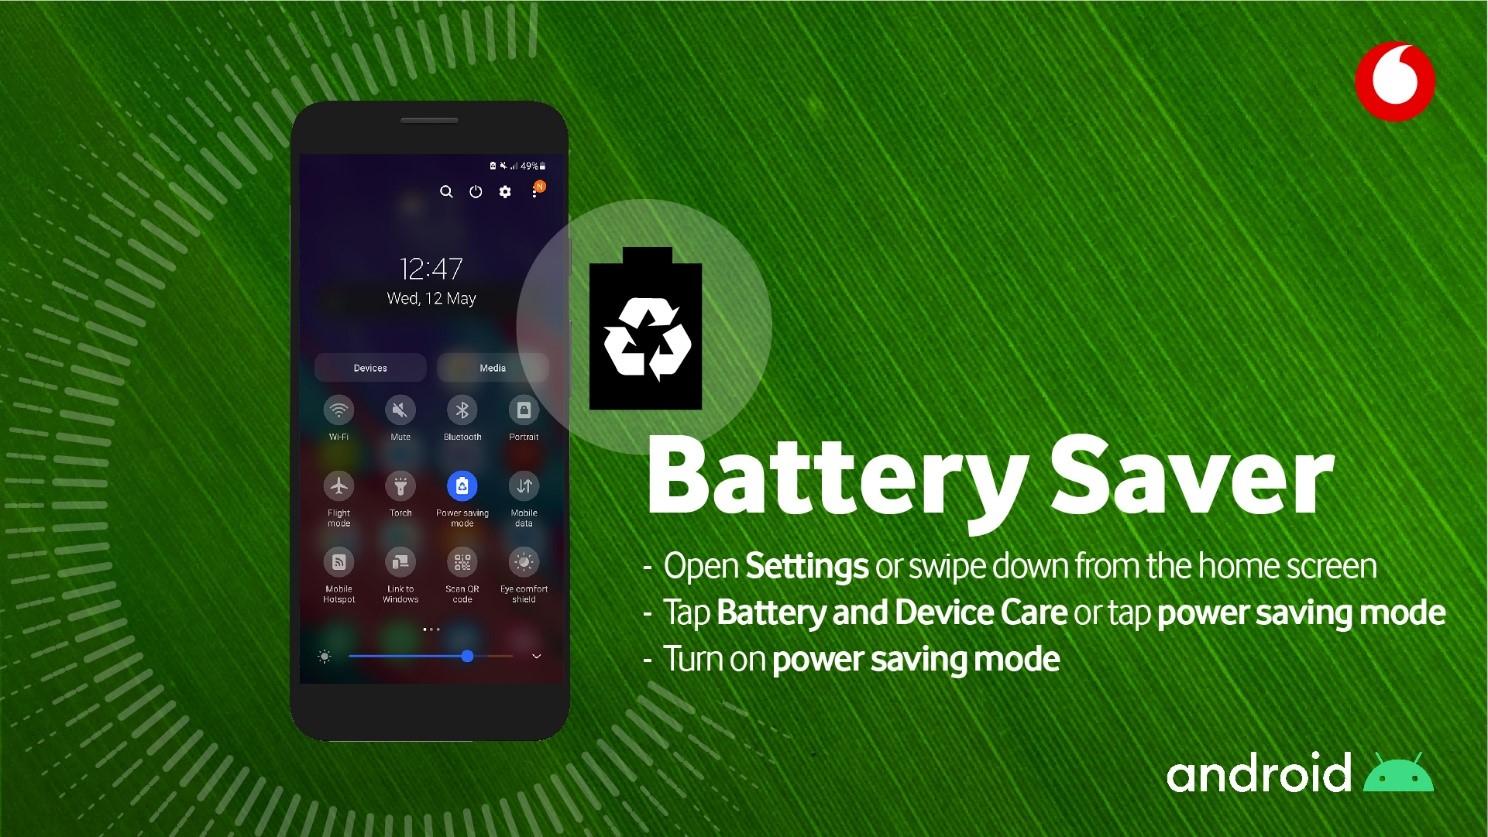 Information about Battery Saver with Android.